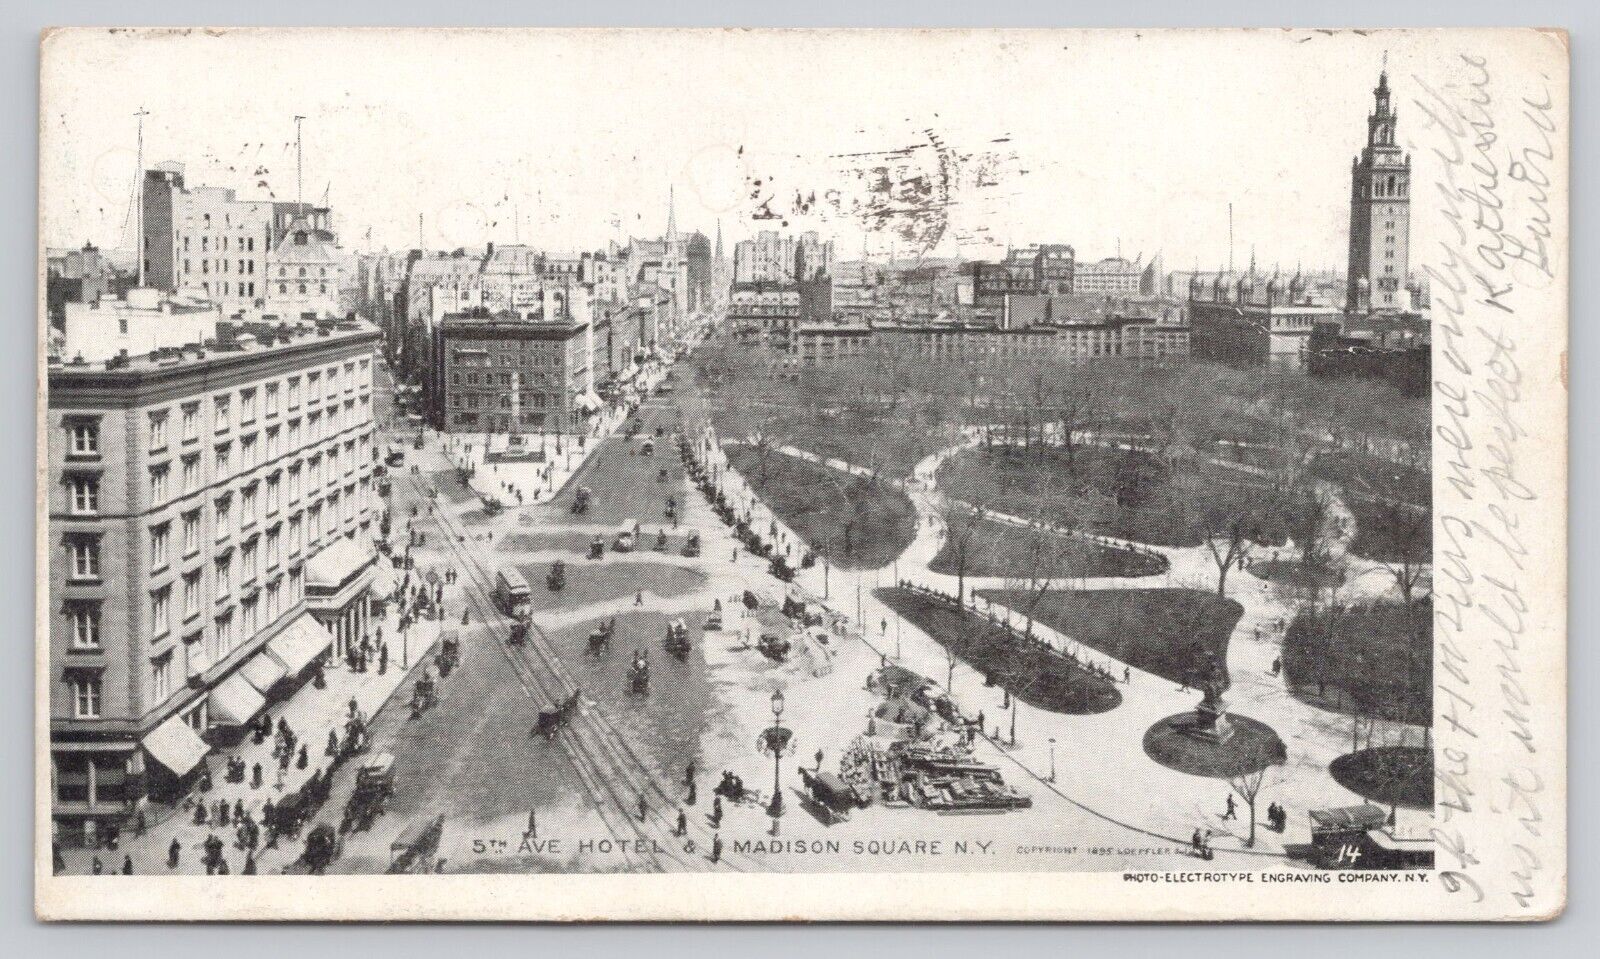 5th Avenue Hotel Madison Square New York City 1898 Private Mailing Card Postcard